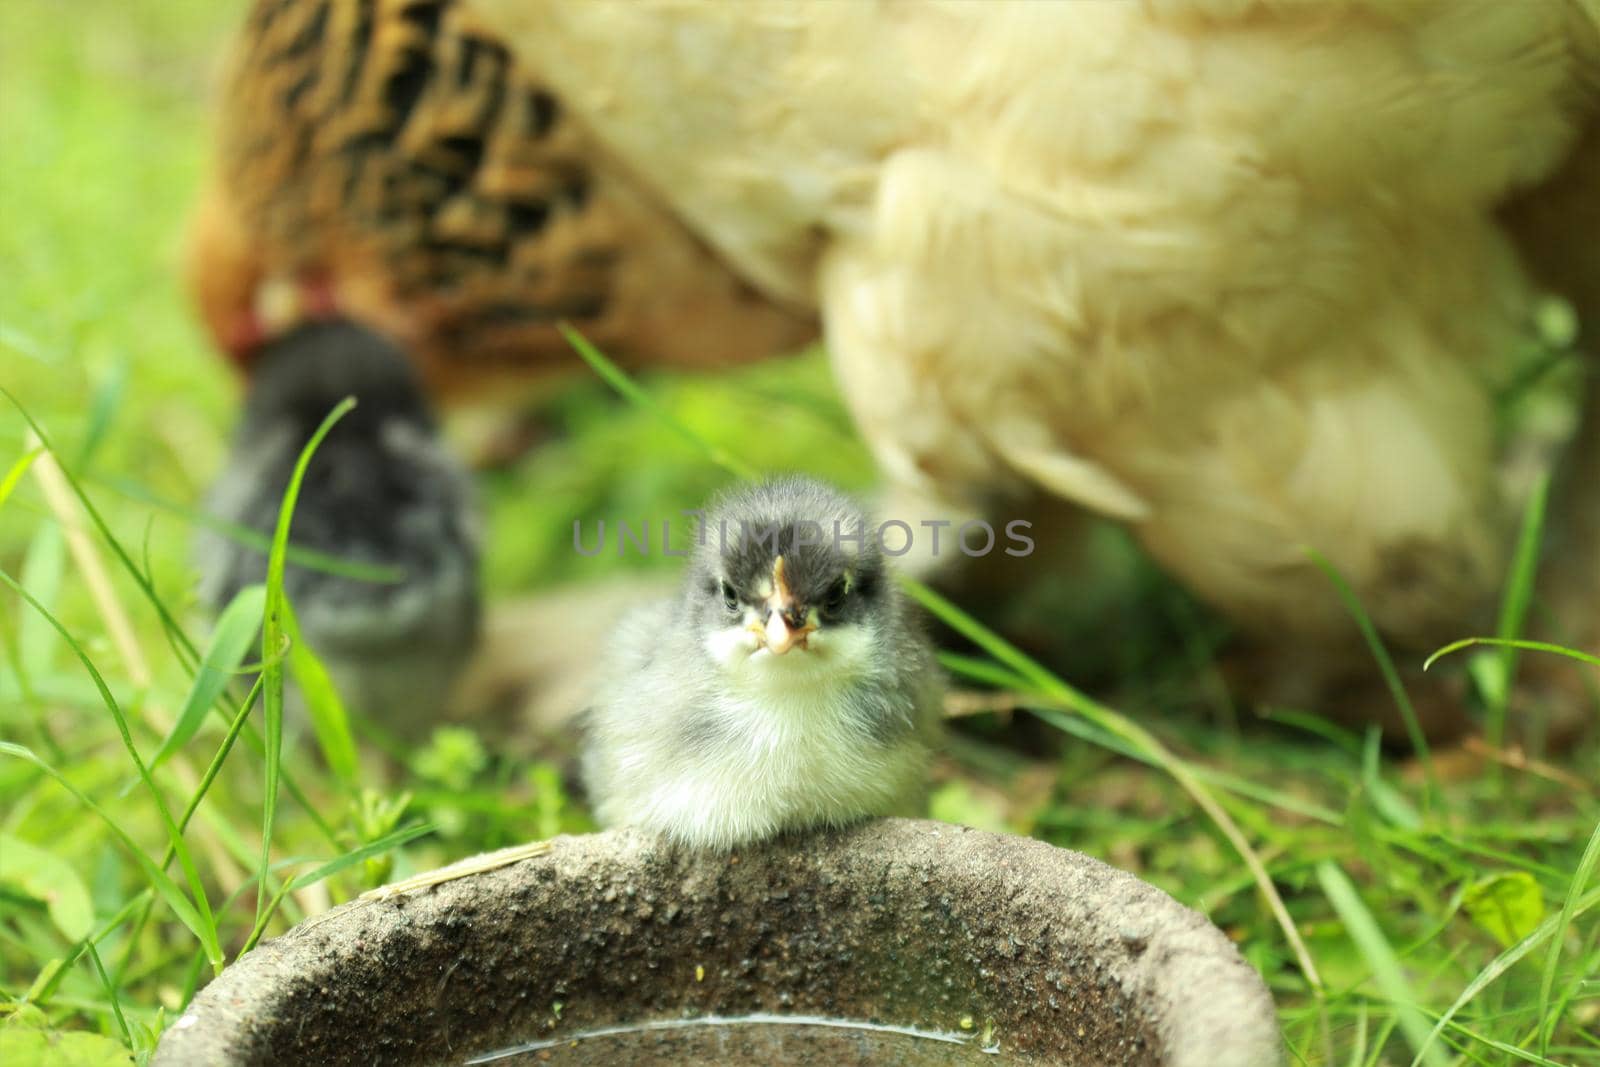 A little young chicken chick in the grass in front of a potions by Luise123